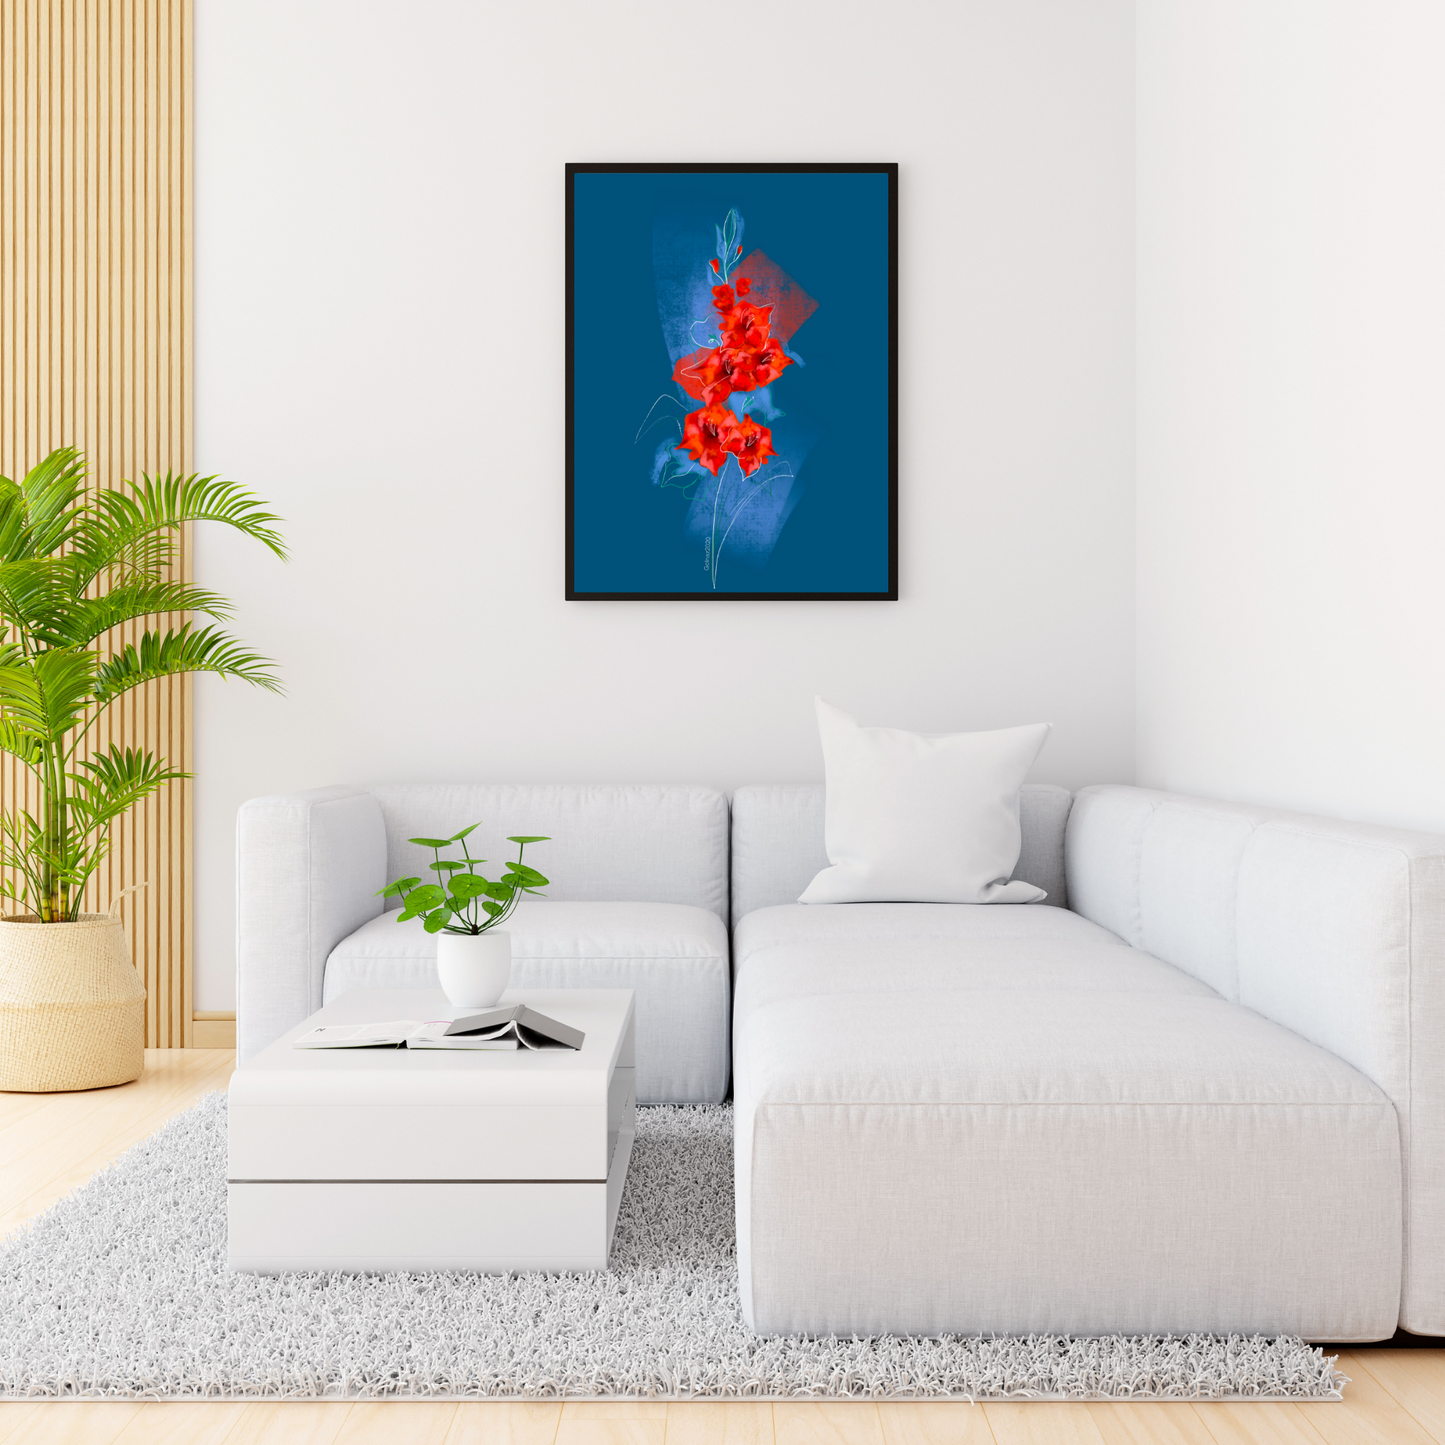 An example of the Gladiolus painting by ArisaTeam in a living room